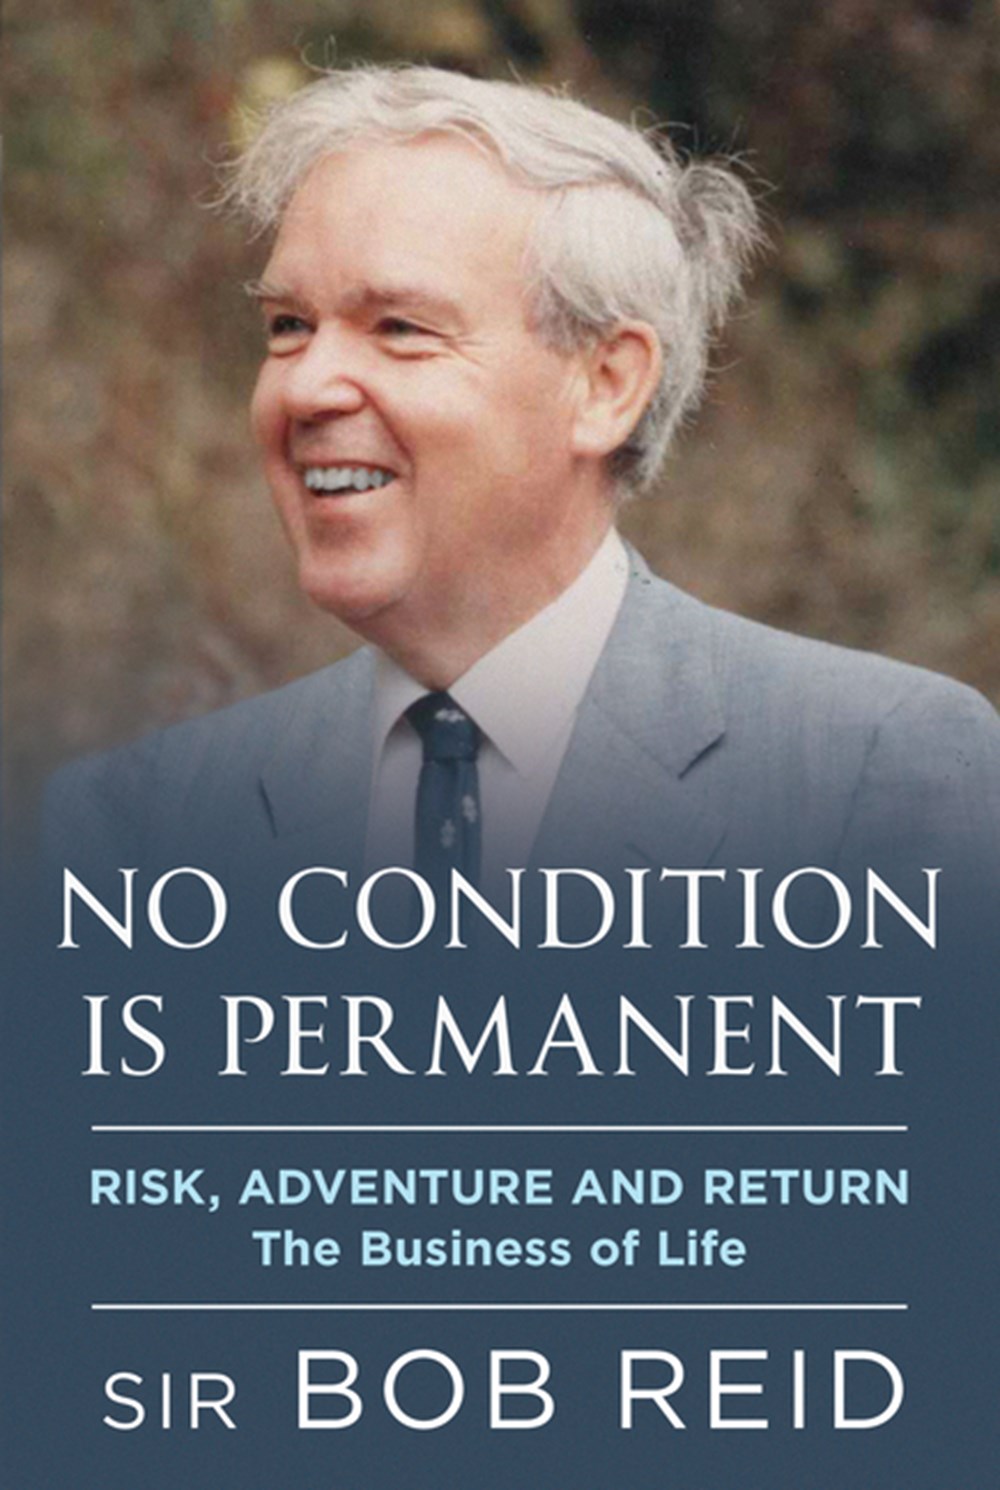 No Condition Is Permanent: Risk, Adventure and Return: The Business of Life